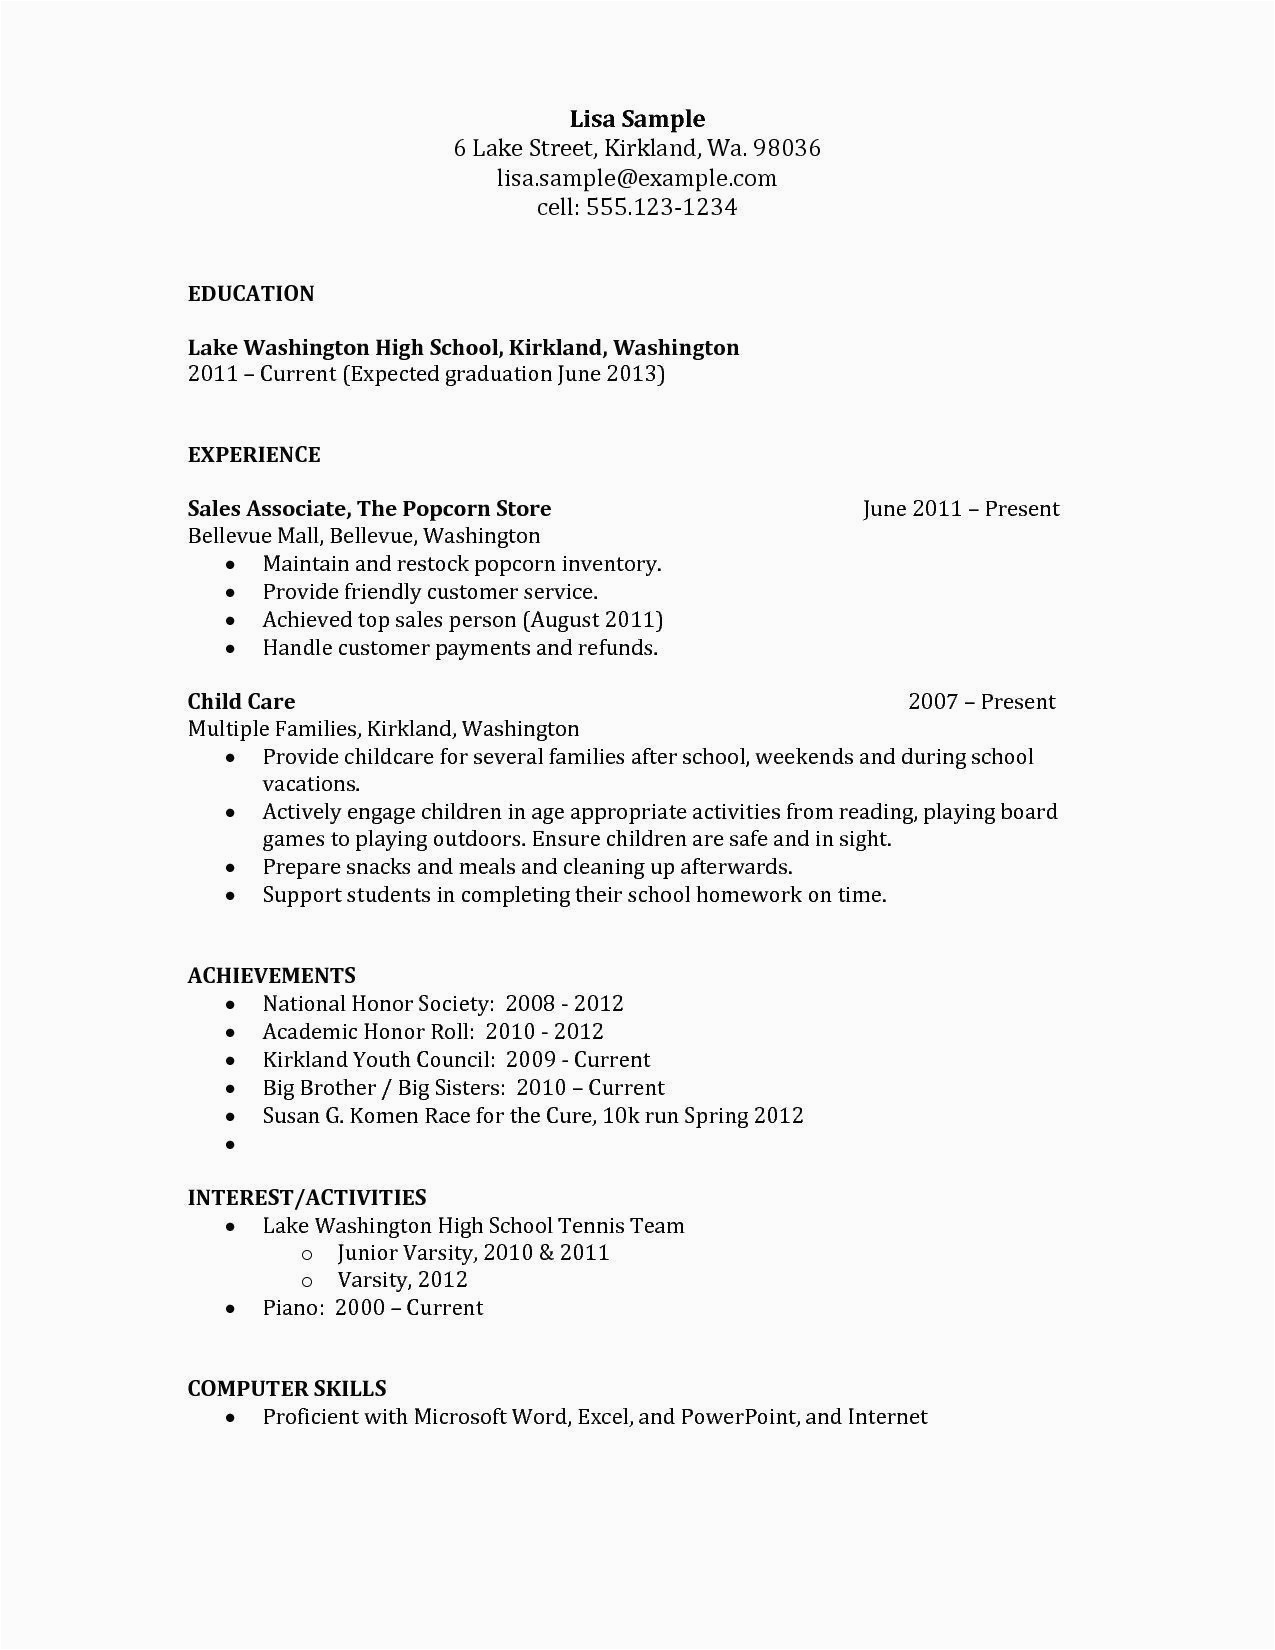 Resume Template for High School Student No Work Experience Grade 10 Teenager High School Student Resume with No Work